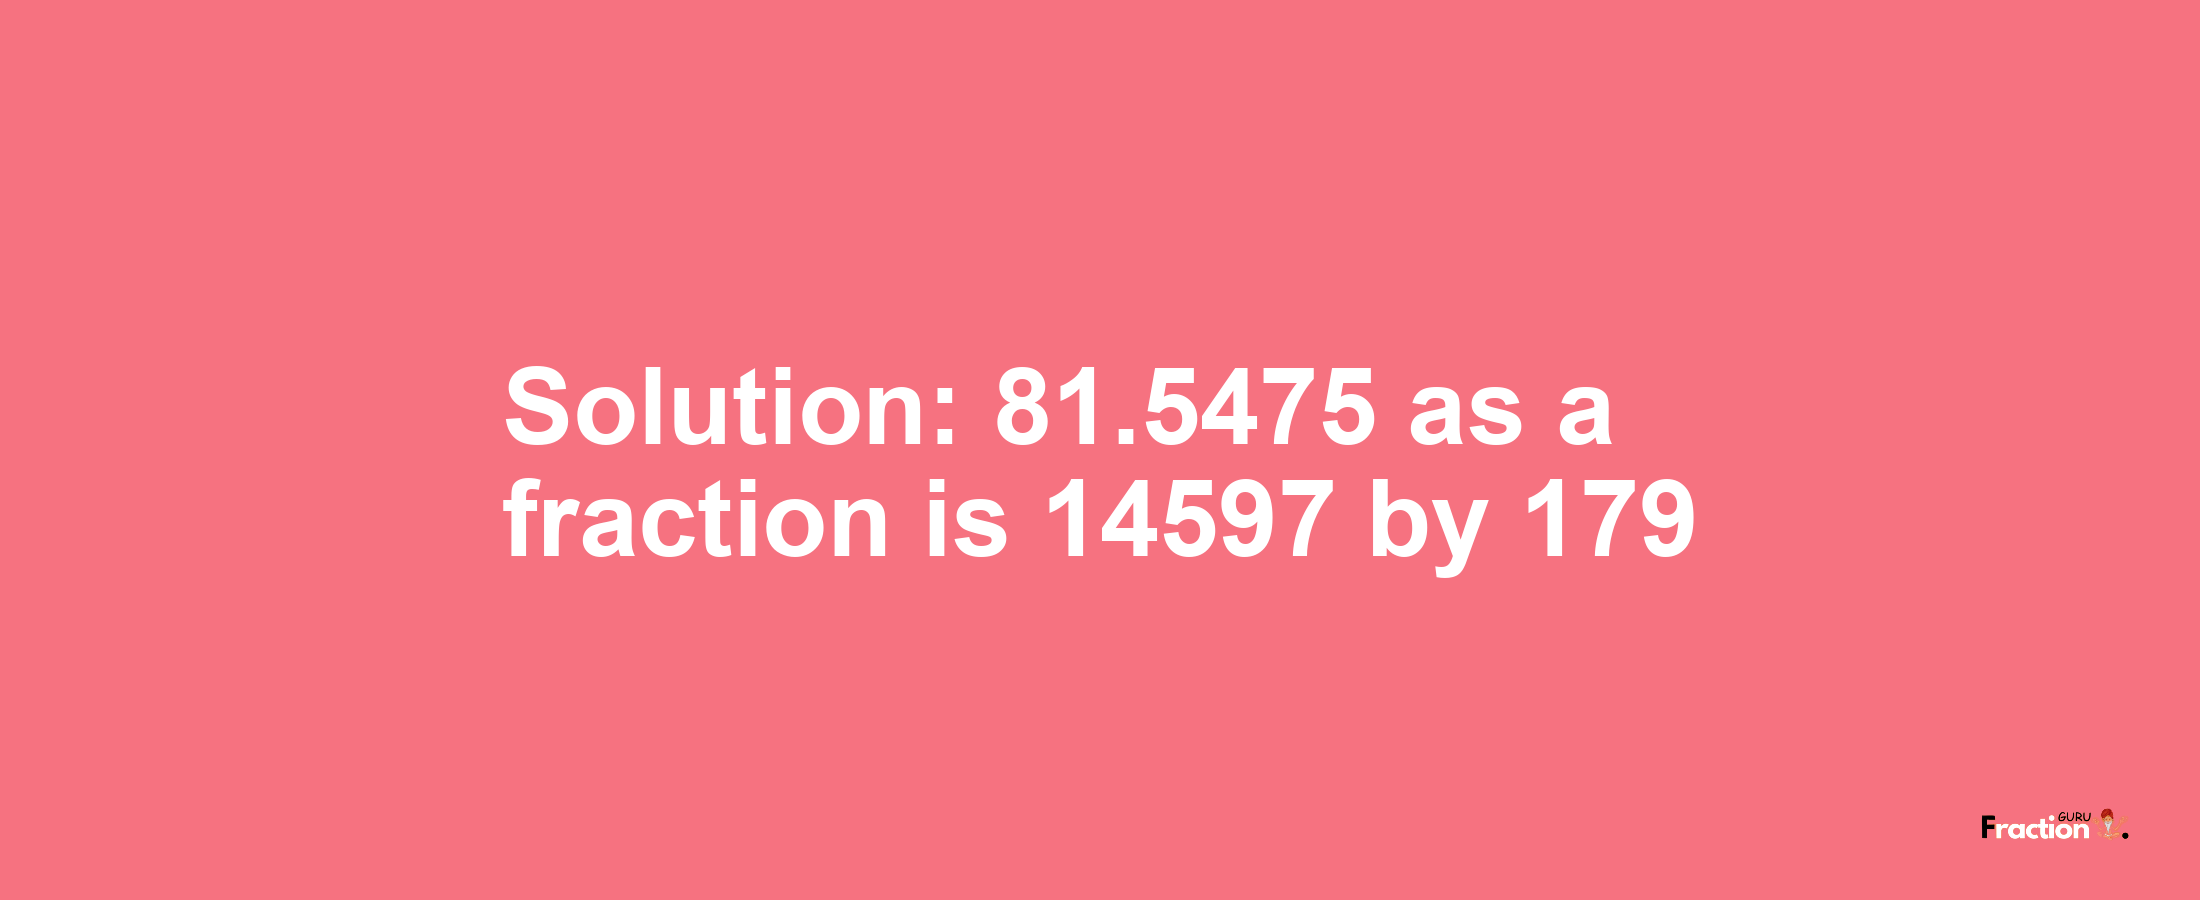 Solution:81.5475 as a fraction is 14597/179